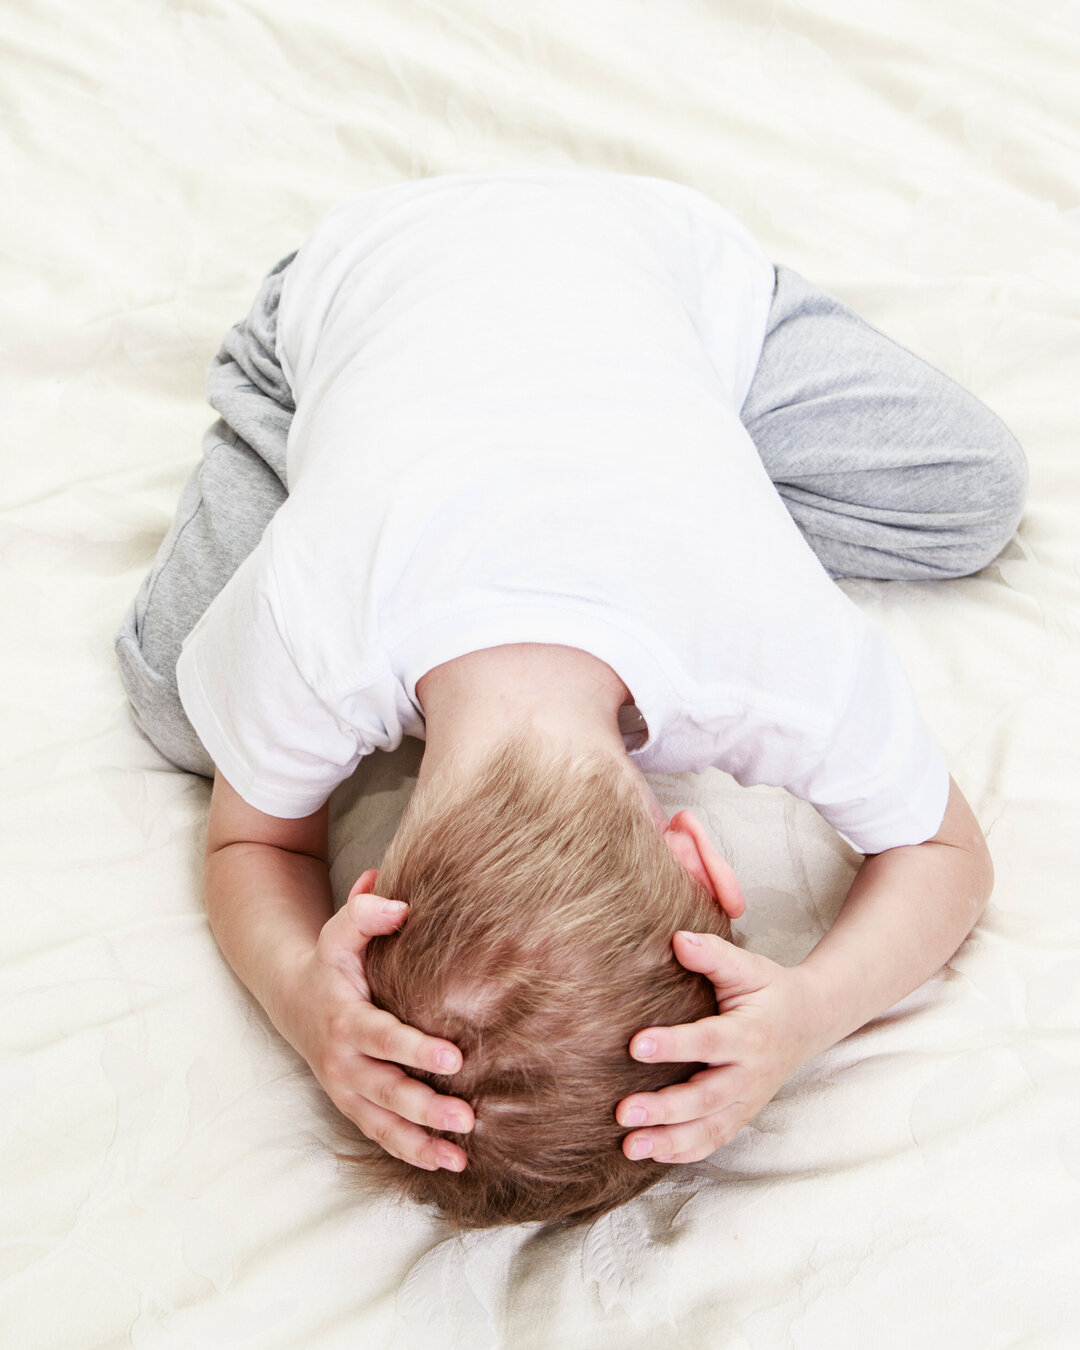 Most parents mistake abdominal migraine for an upset stomach. Some children feel better after vomiting and go to sleep, which makes it difficult for parents to spot a headache and that tends to shift focus to the abdominal symptoms only. ​​​​​​​​
Mos